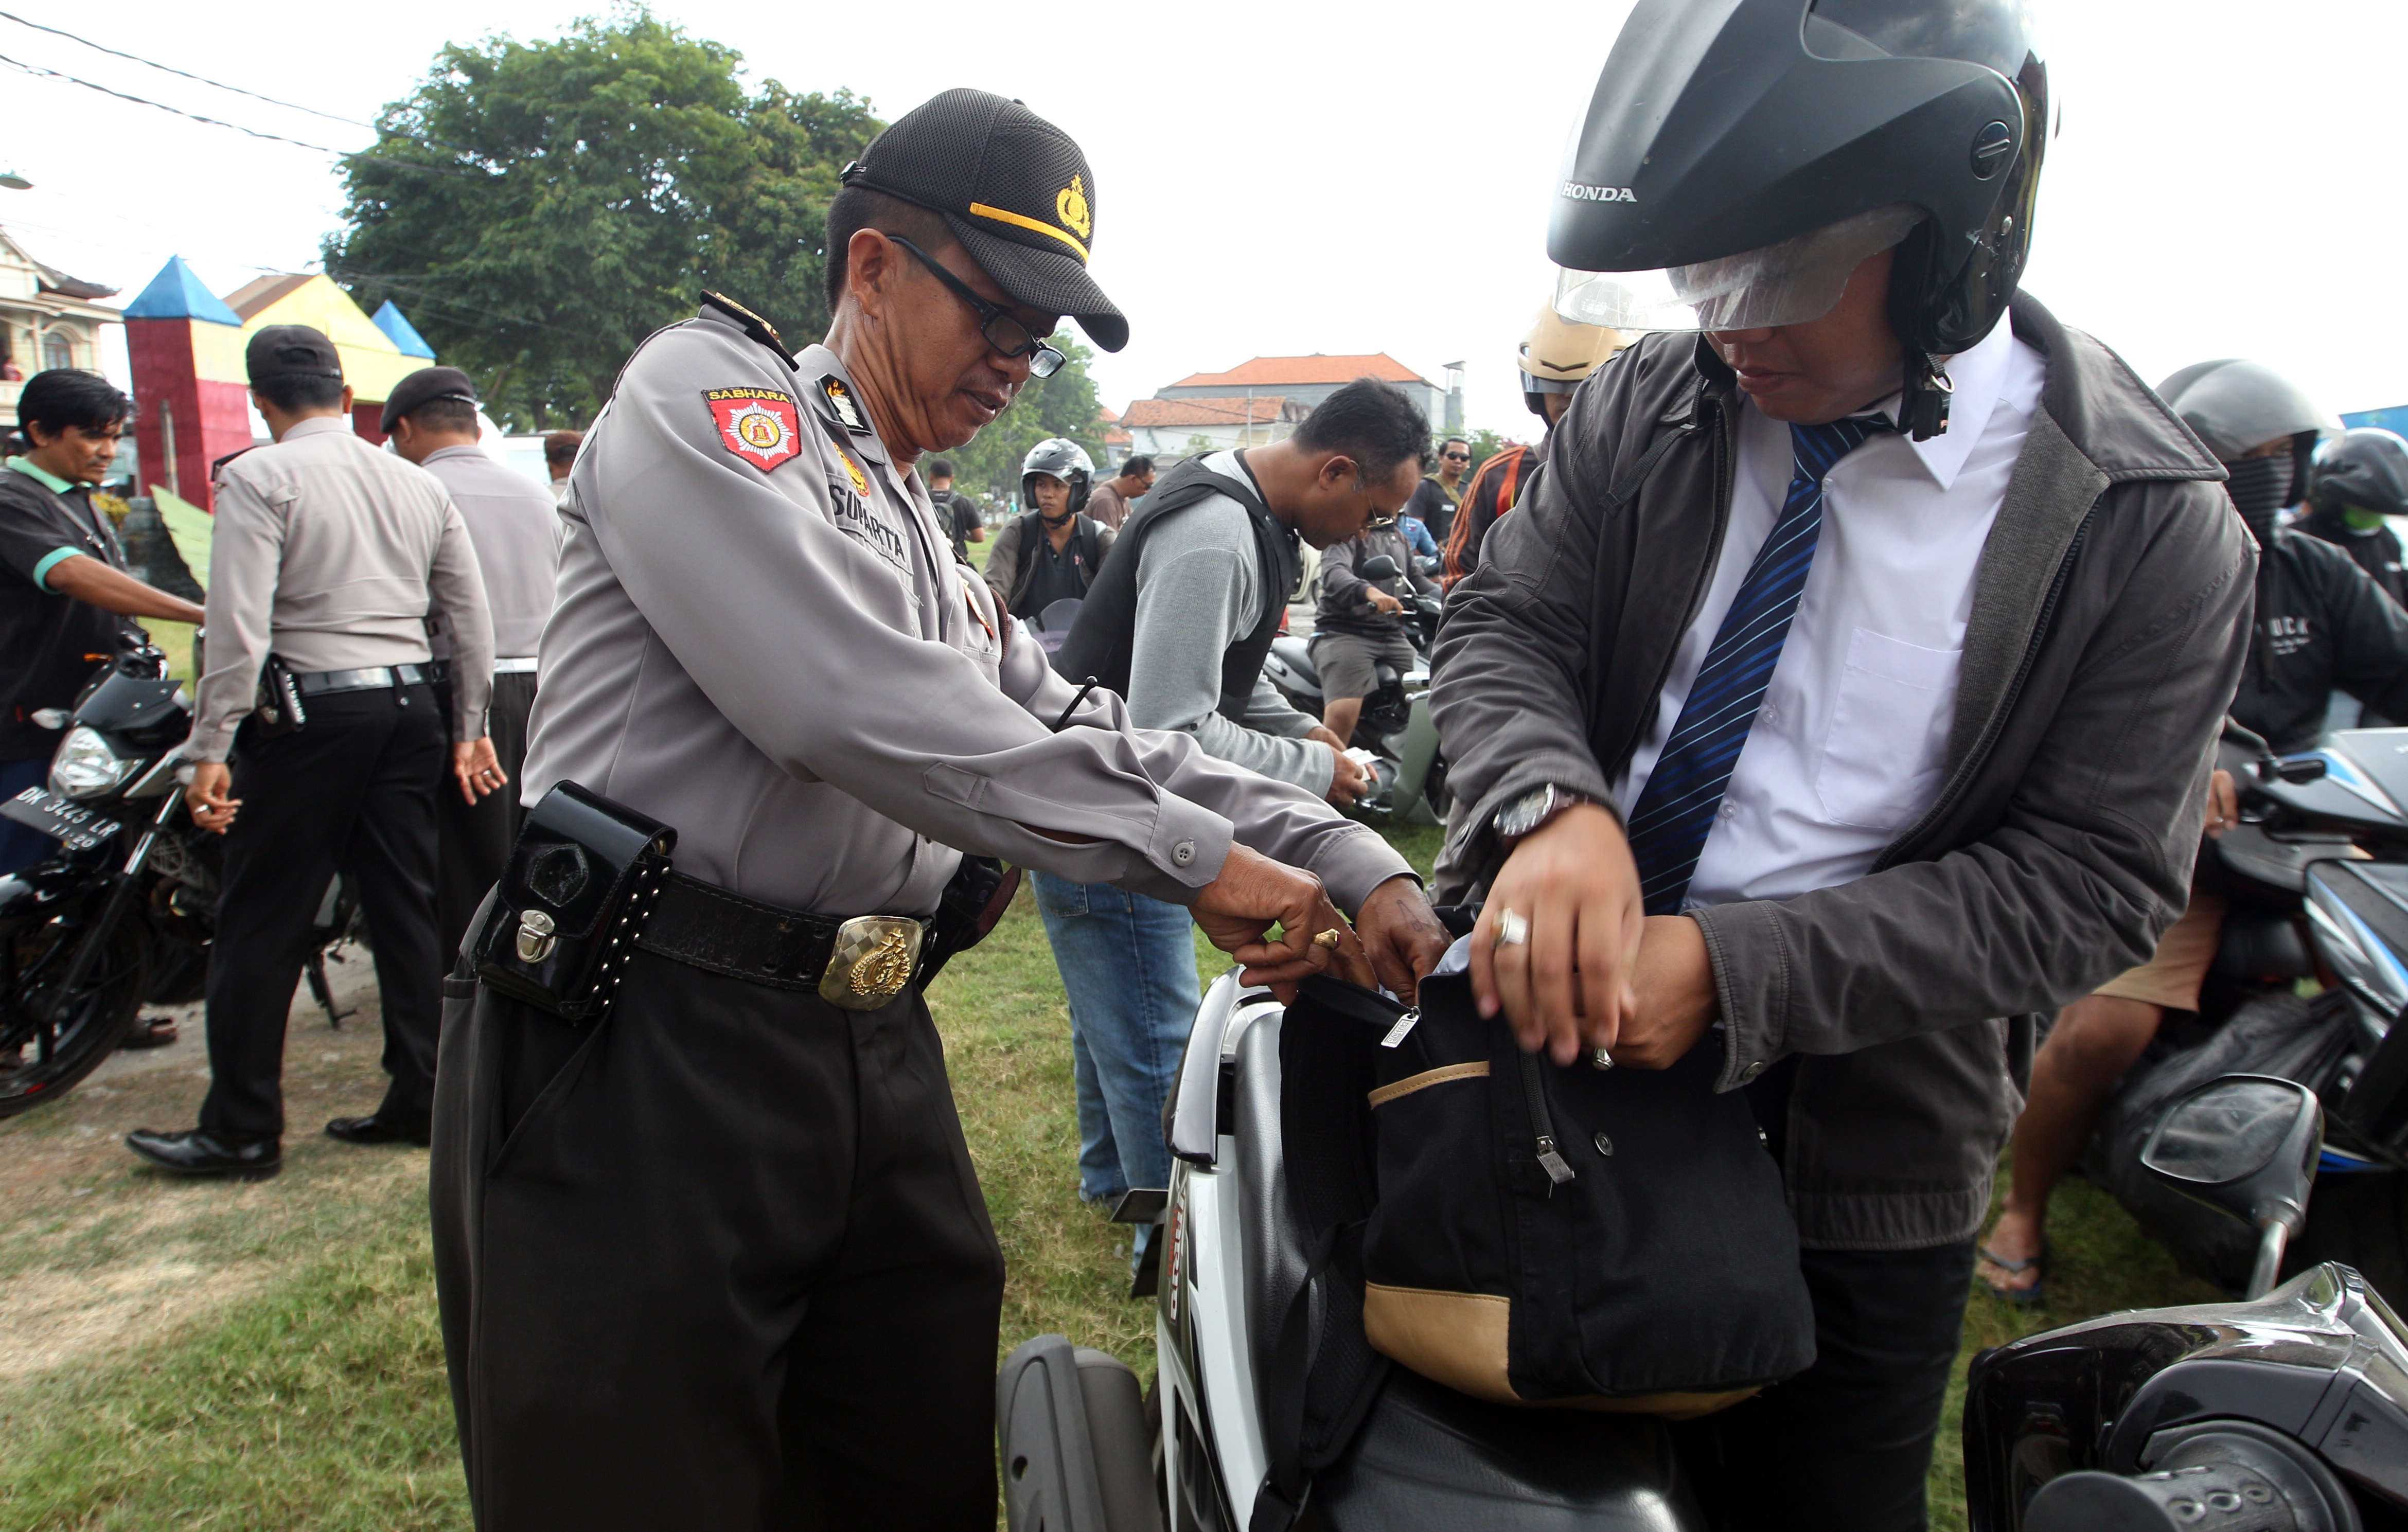 Police officers checked motorcyclists at a security check point in Bali, Indonesia, Wednesday, Jan. 20, 2016. Security at resort island of Bali has been increased after the Jakarta attack, which was the first major assault by militants in Indonesia since 2009. (AP Photo/Firdia Lisnawati)